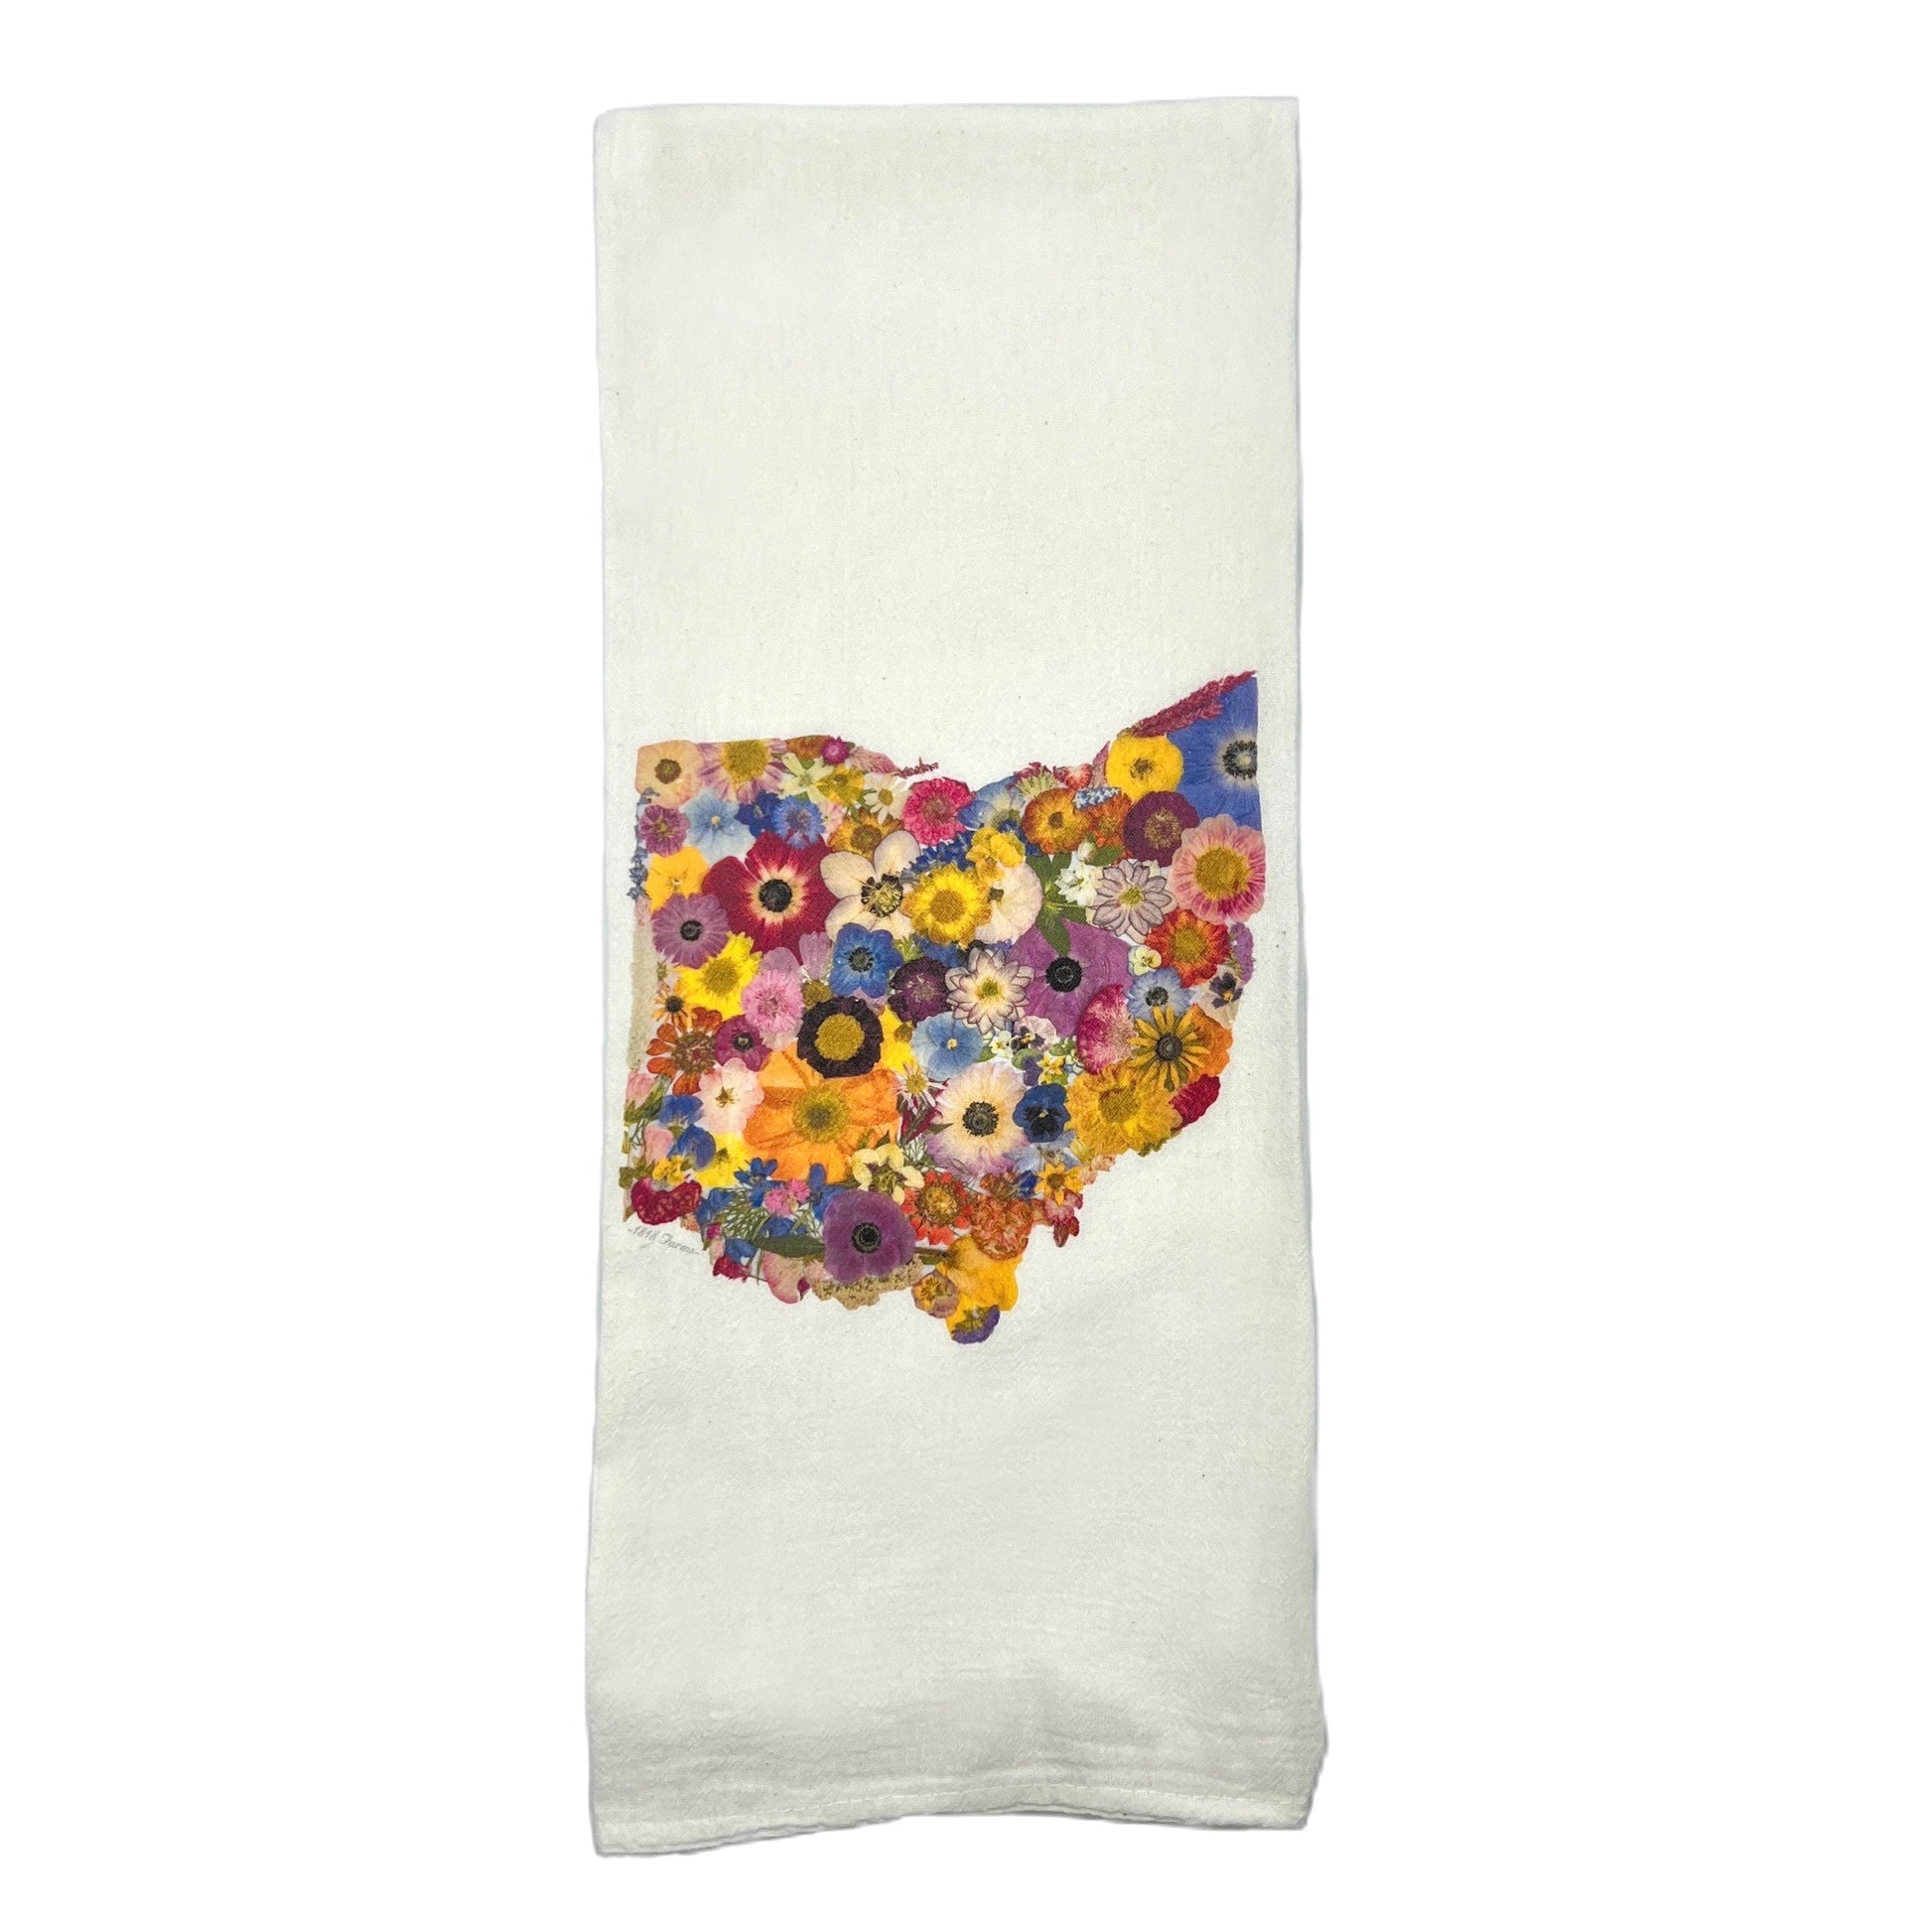 State Themed Flour Sack Towel  - "Where I Bloom" Collection Towel 1818 Farms Ohio  